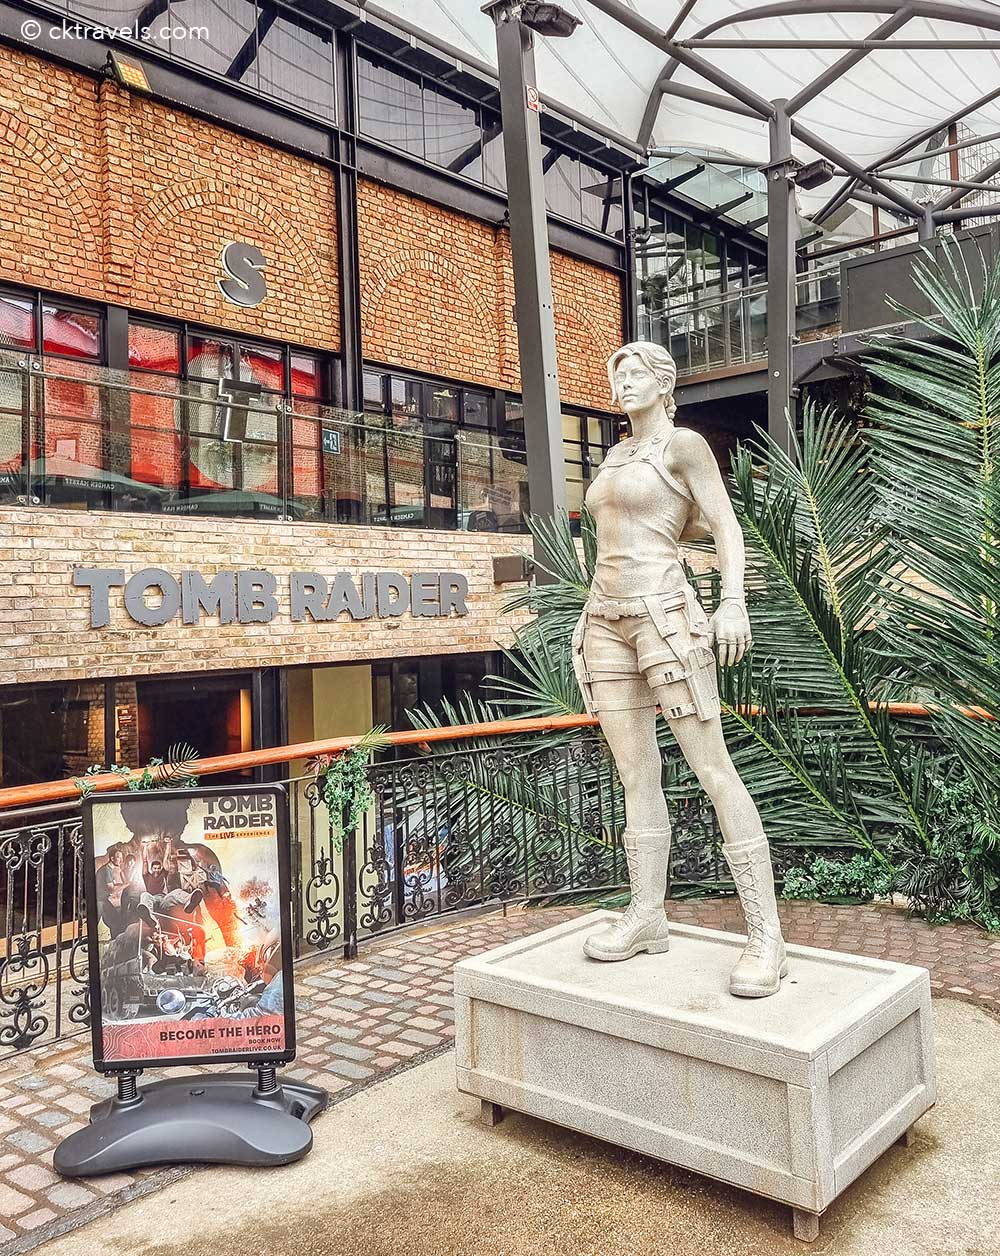 Tomb Raider: The Live Experience Camden